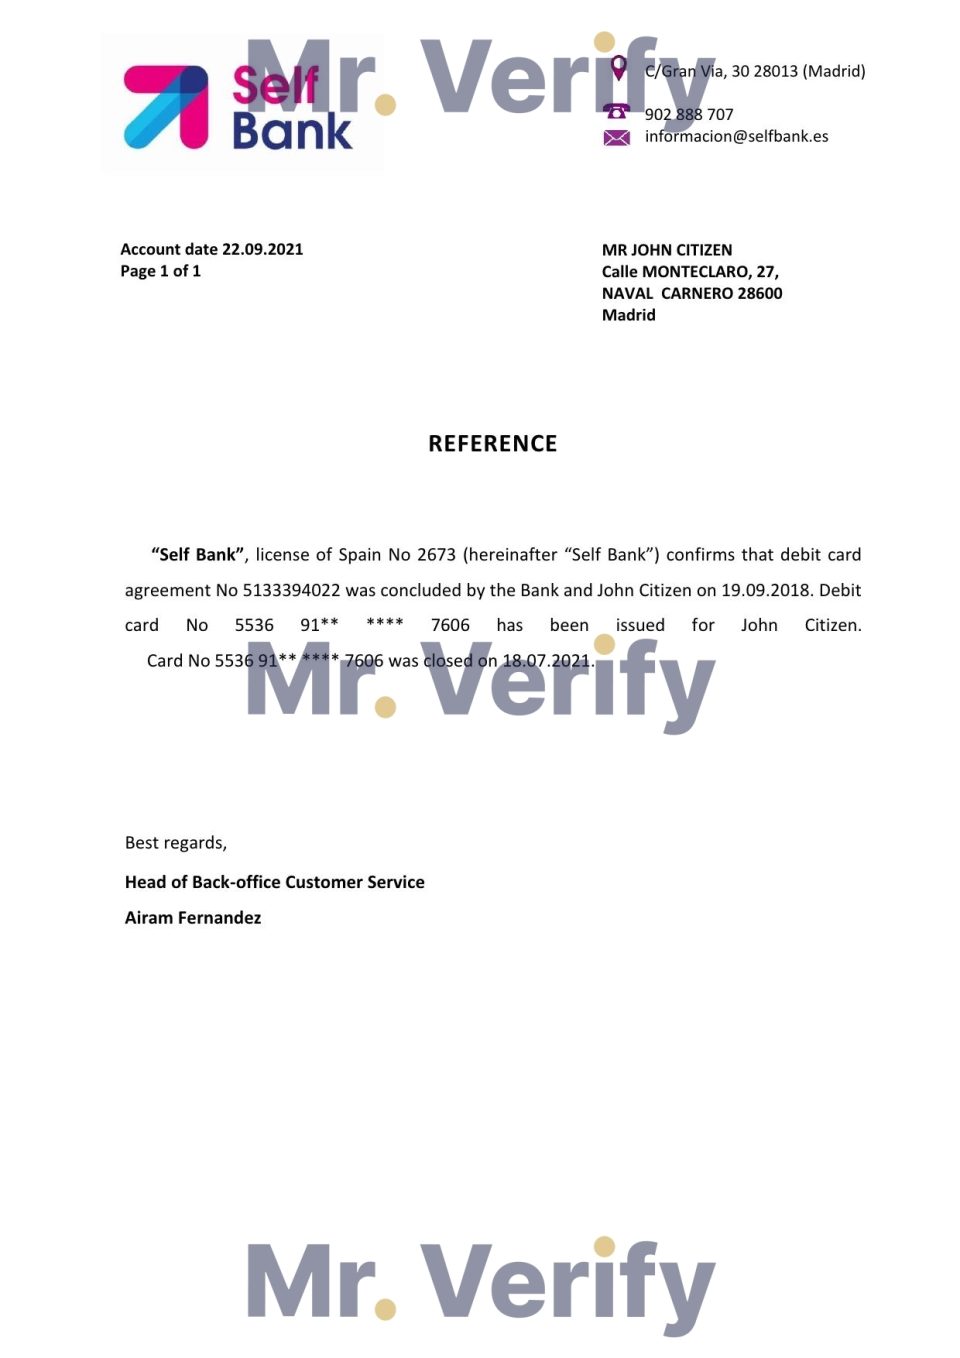 Download Spain Self Bank Reference Letter Templates | Editable Word